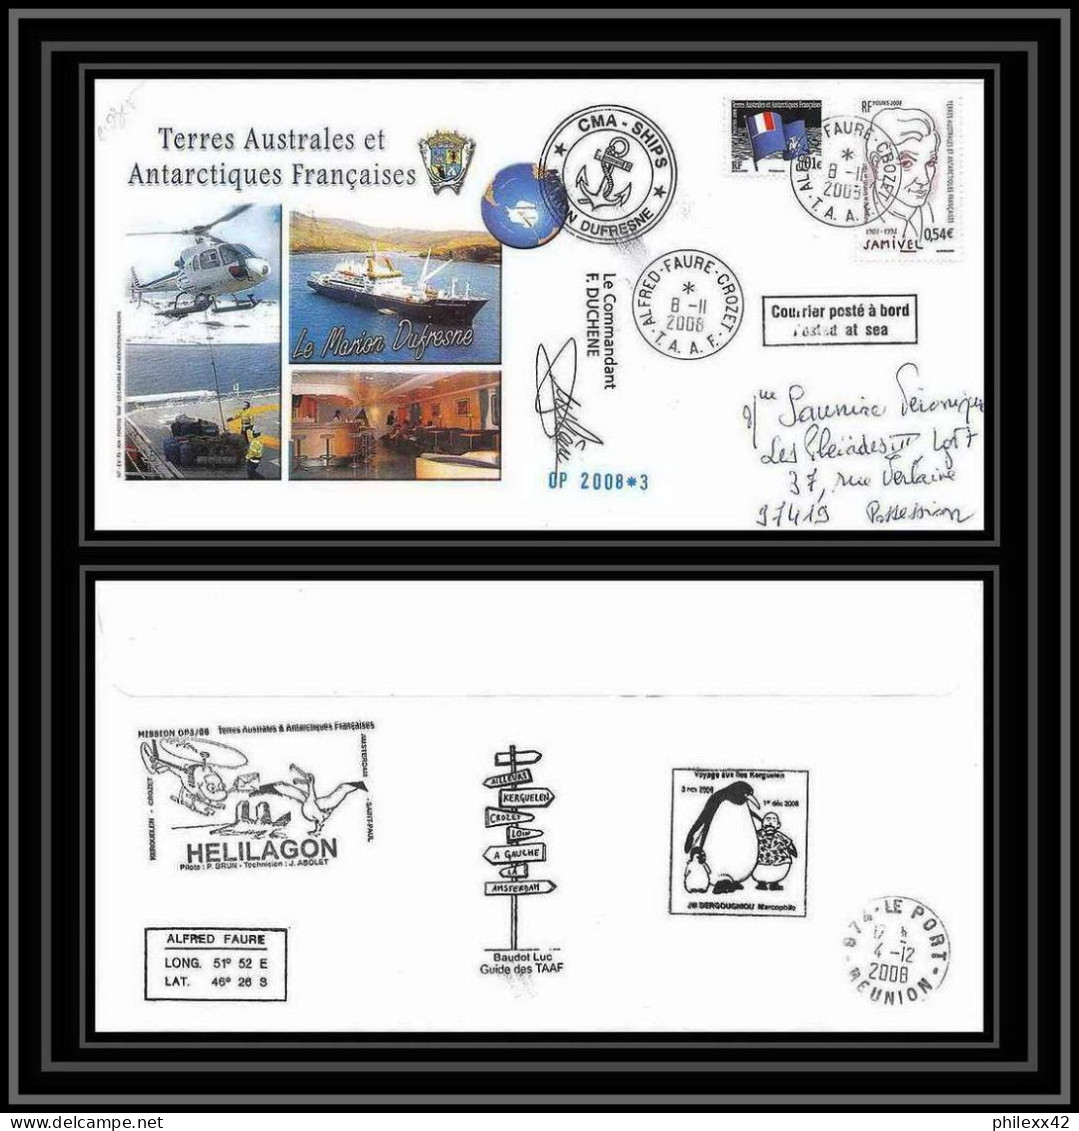 2843 ANTARCTIC Terres Australes TAAF Helilagon Lettre Cover Dufresne Signé Signed Op 2008/3 Crozet 8/11/2008 N°513 - Helicópteros